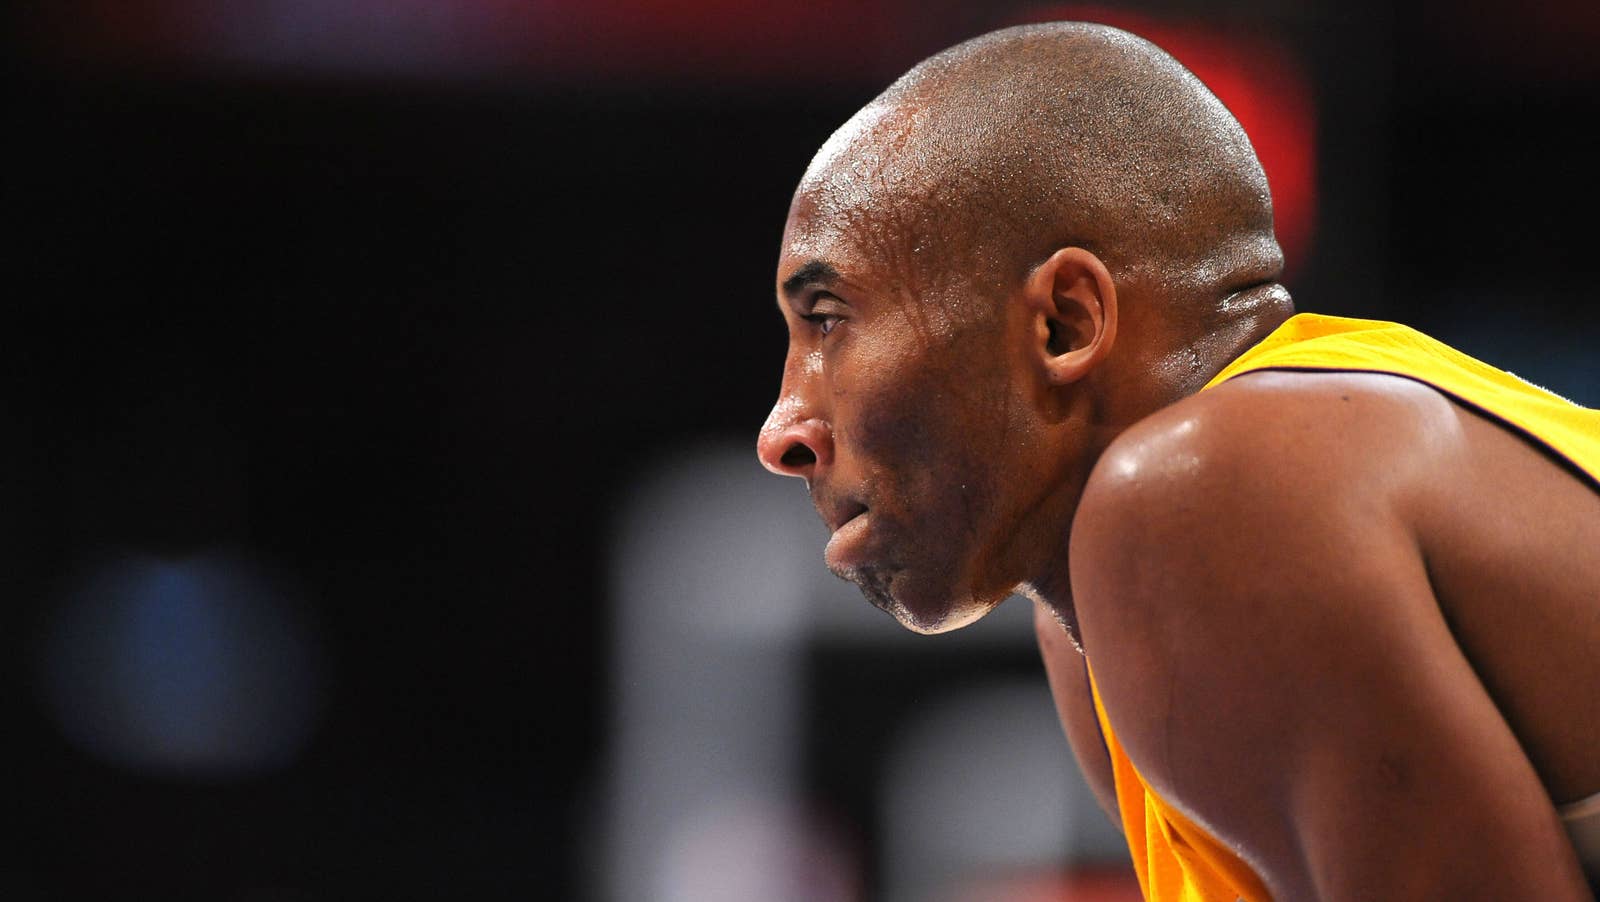 Kobe Bryant of the Los Angeles Lakers bites his jersey during a game  News Photo - Getty Images